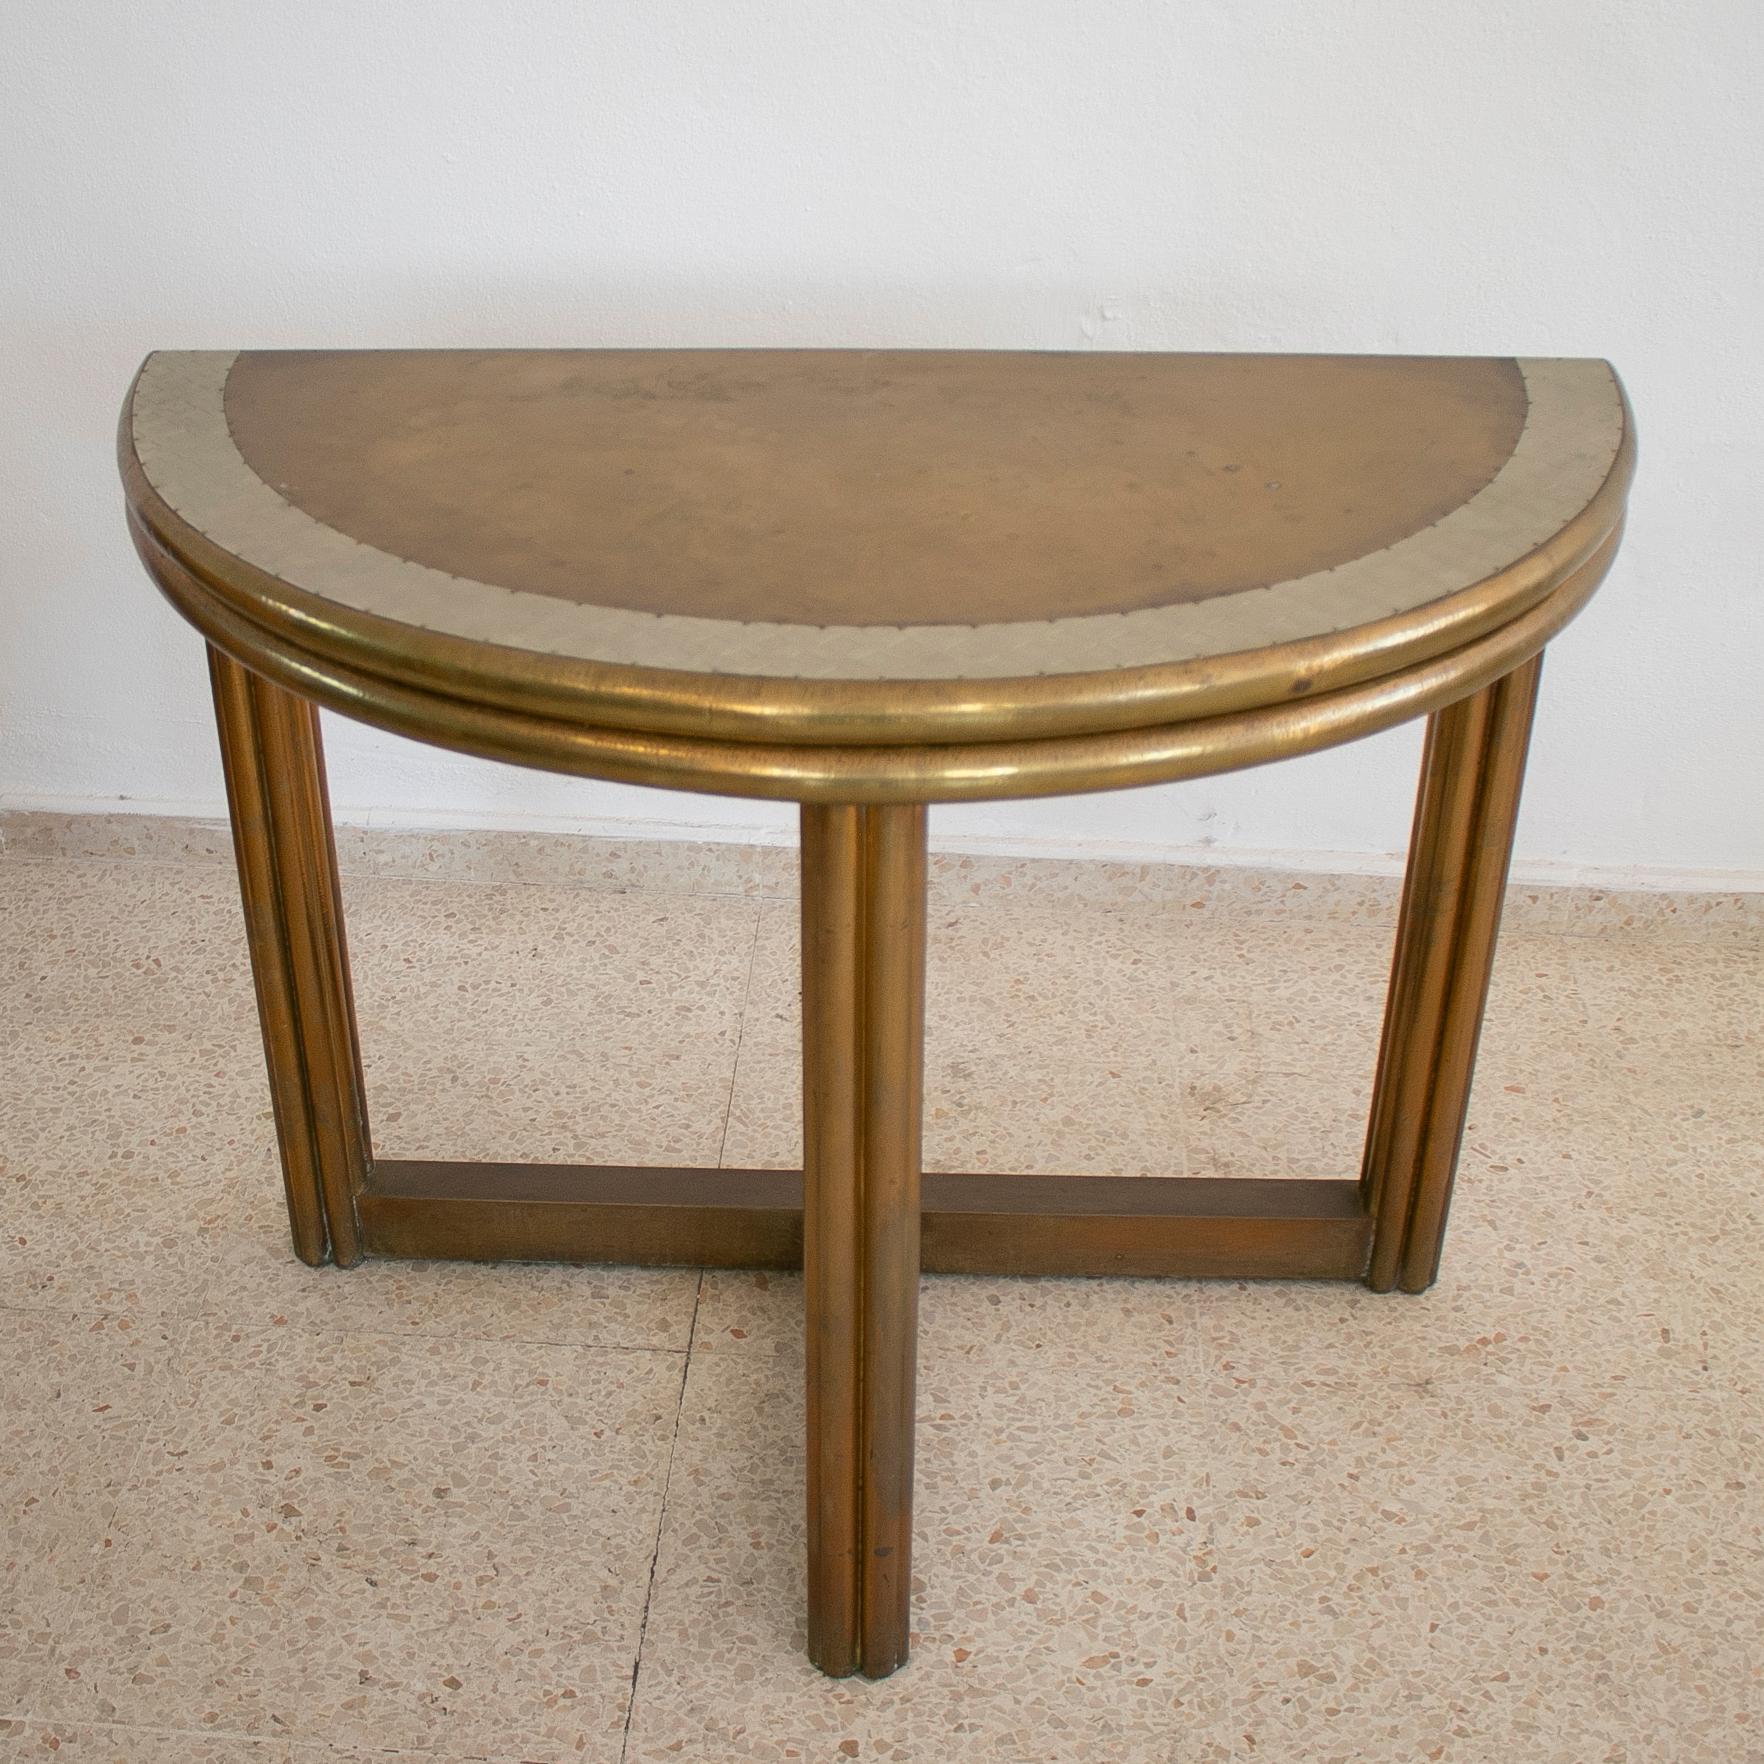 Vintage 1980s Spanish handcrafted 2-tone bronze on wood round folding console table singed 